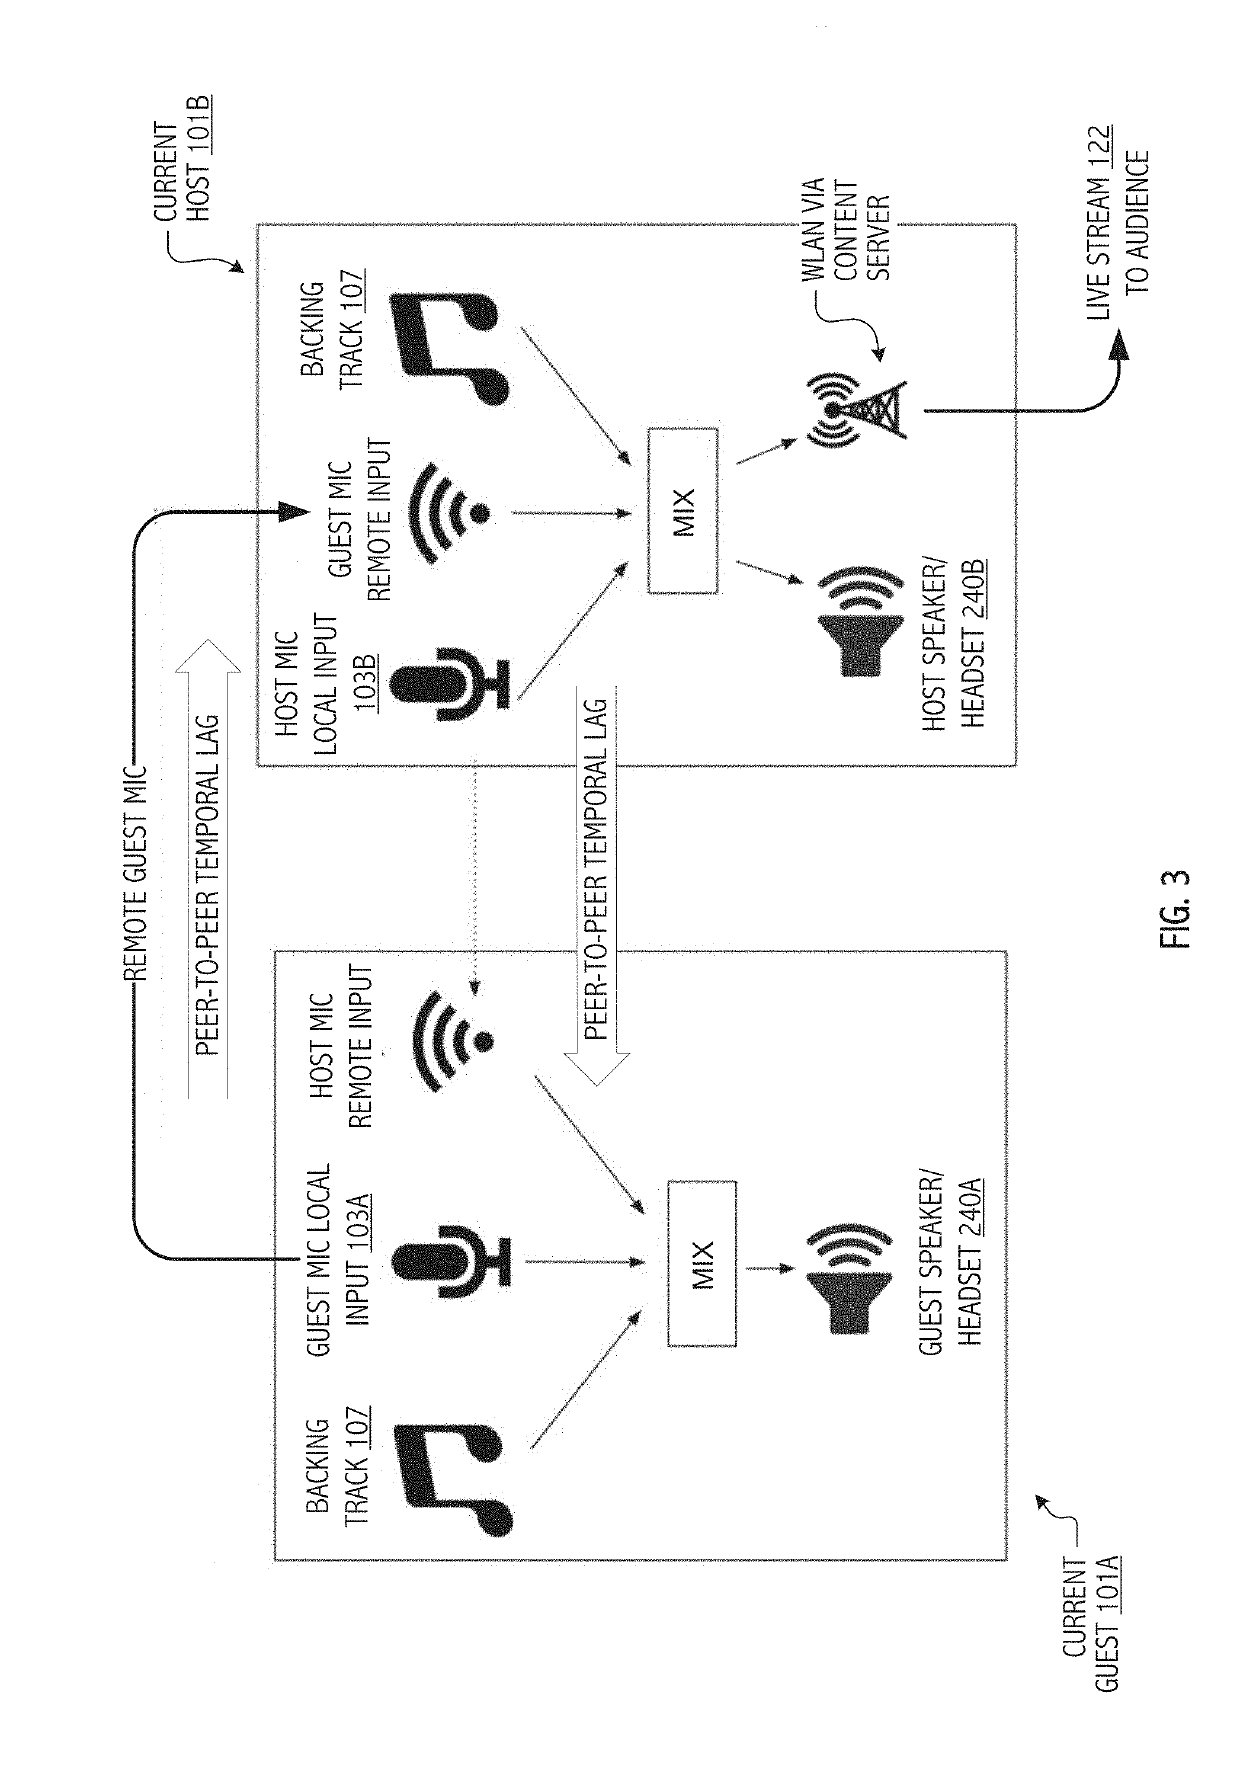 Audiovisual collaboration system and method with latency management for wide-area broadcast and social media-type user interface mechanics